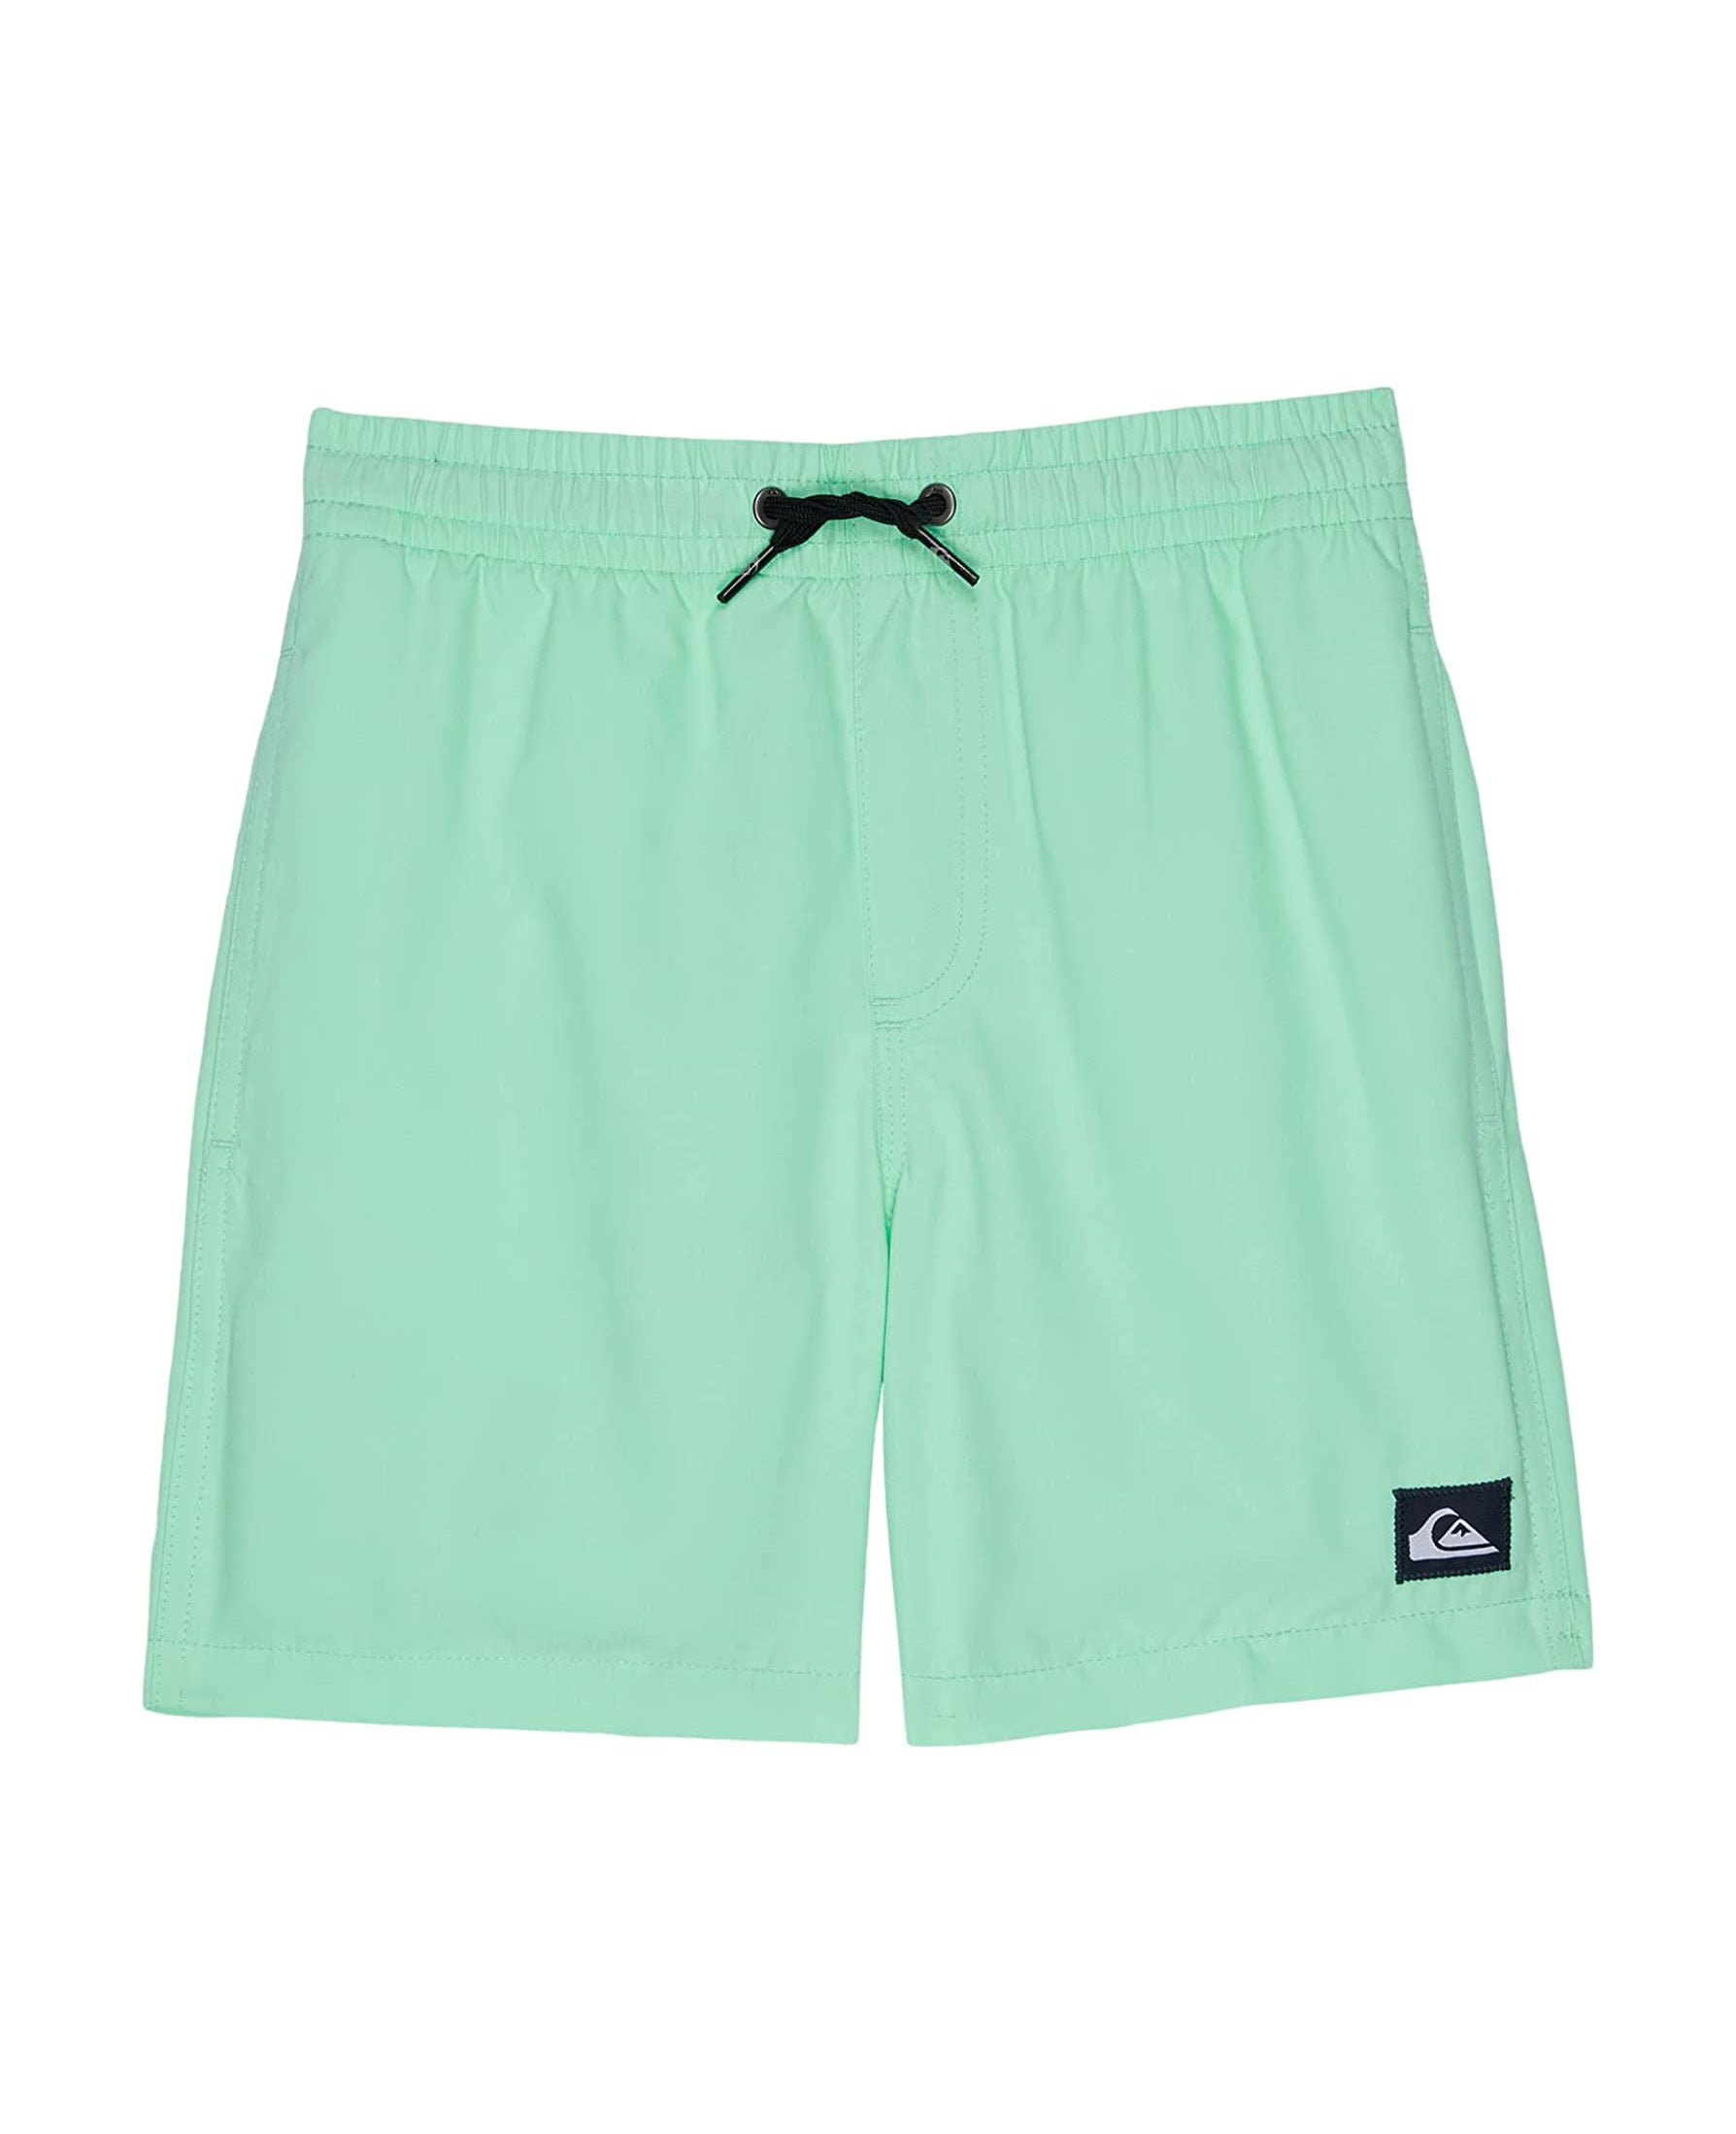 Quiksilver Boys 2-7 Mix Volley GCZ0 5